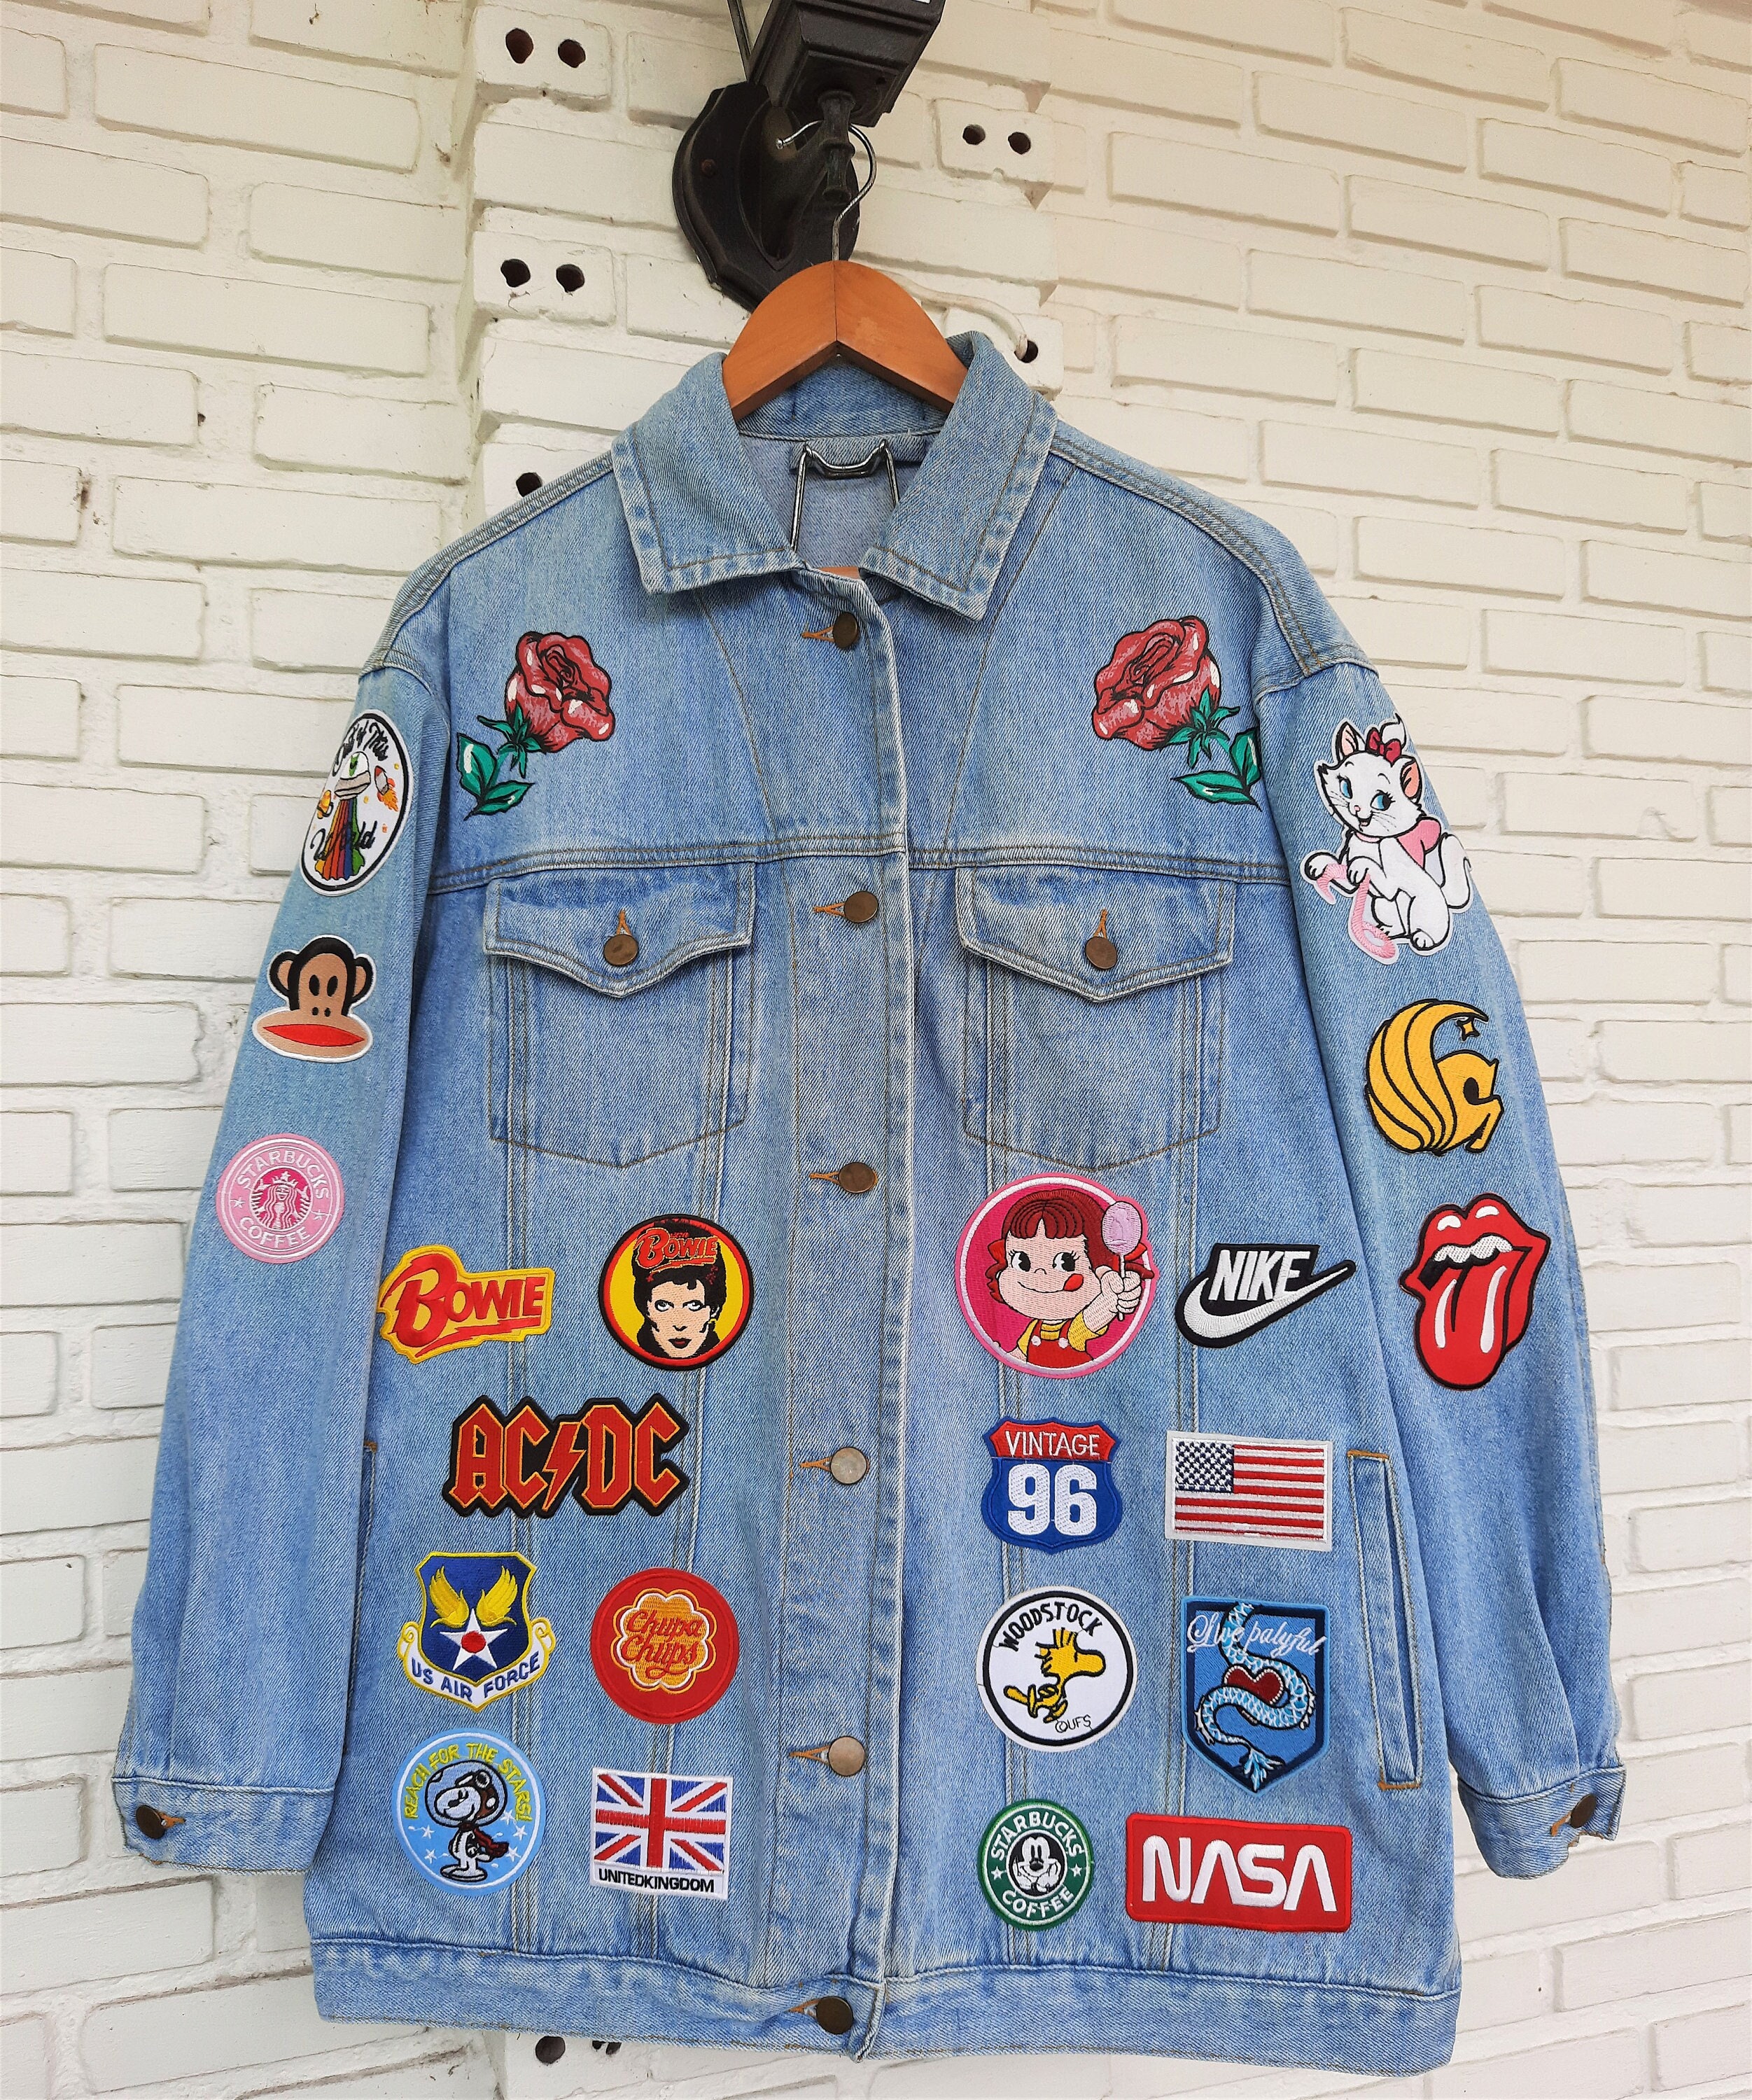 Details more than 69 oversized denim jacket with patches latest